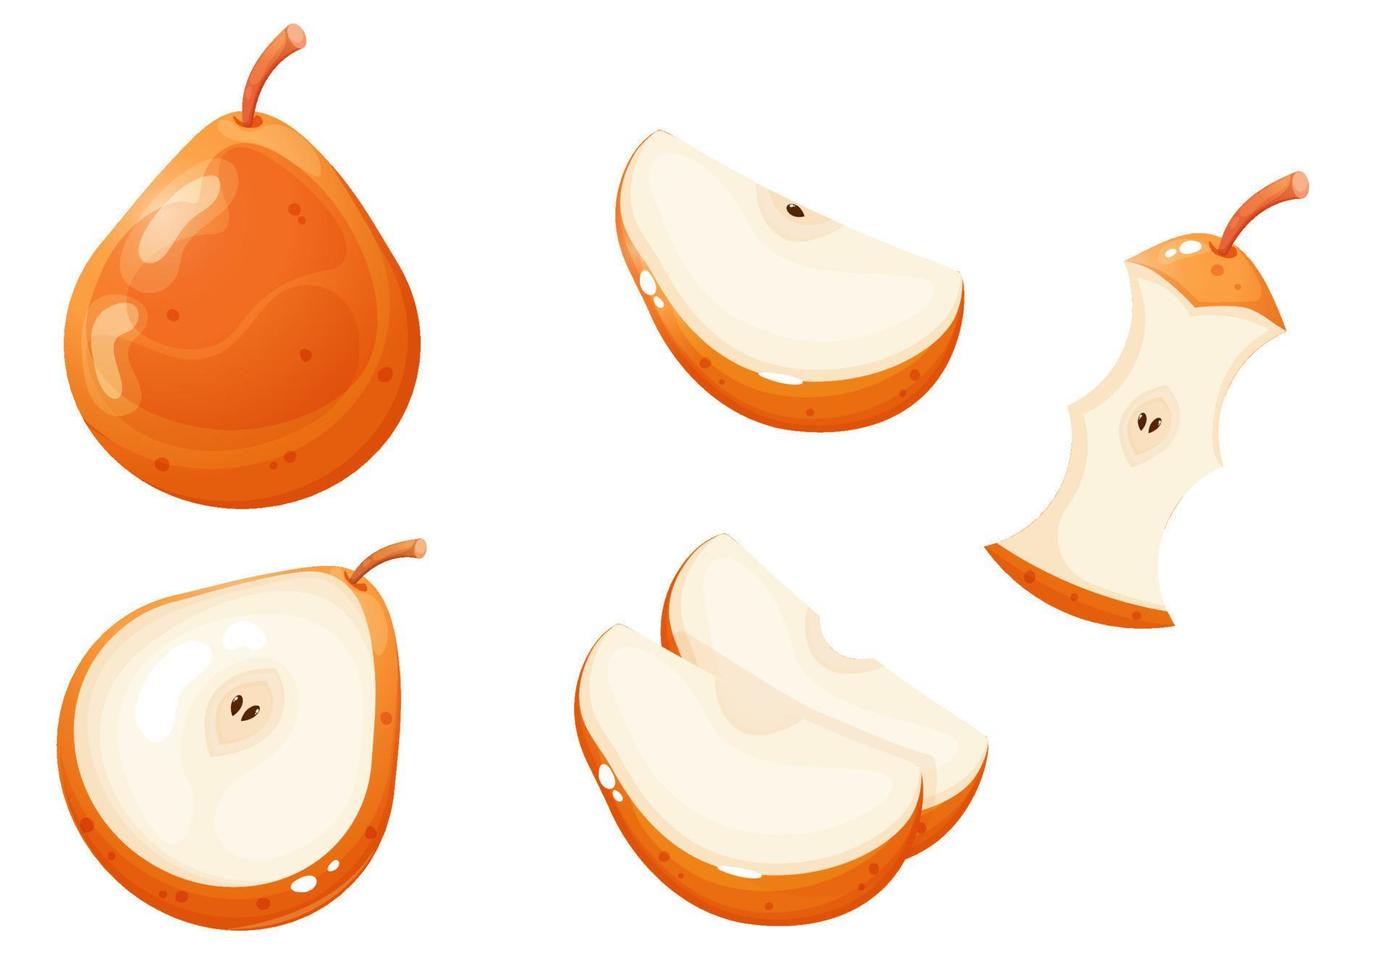 whole orange pear and different pear slices. cartoon style fruits. vector